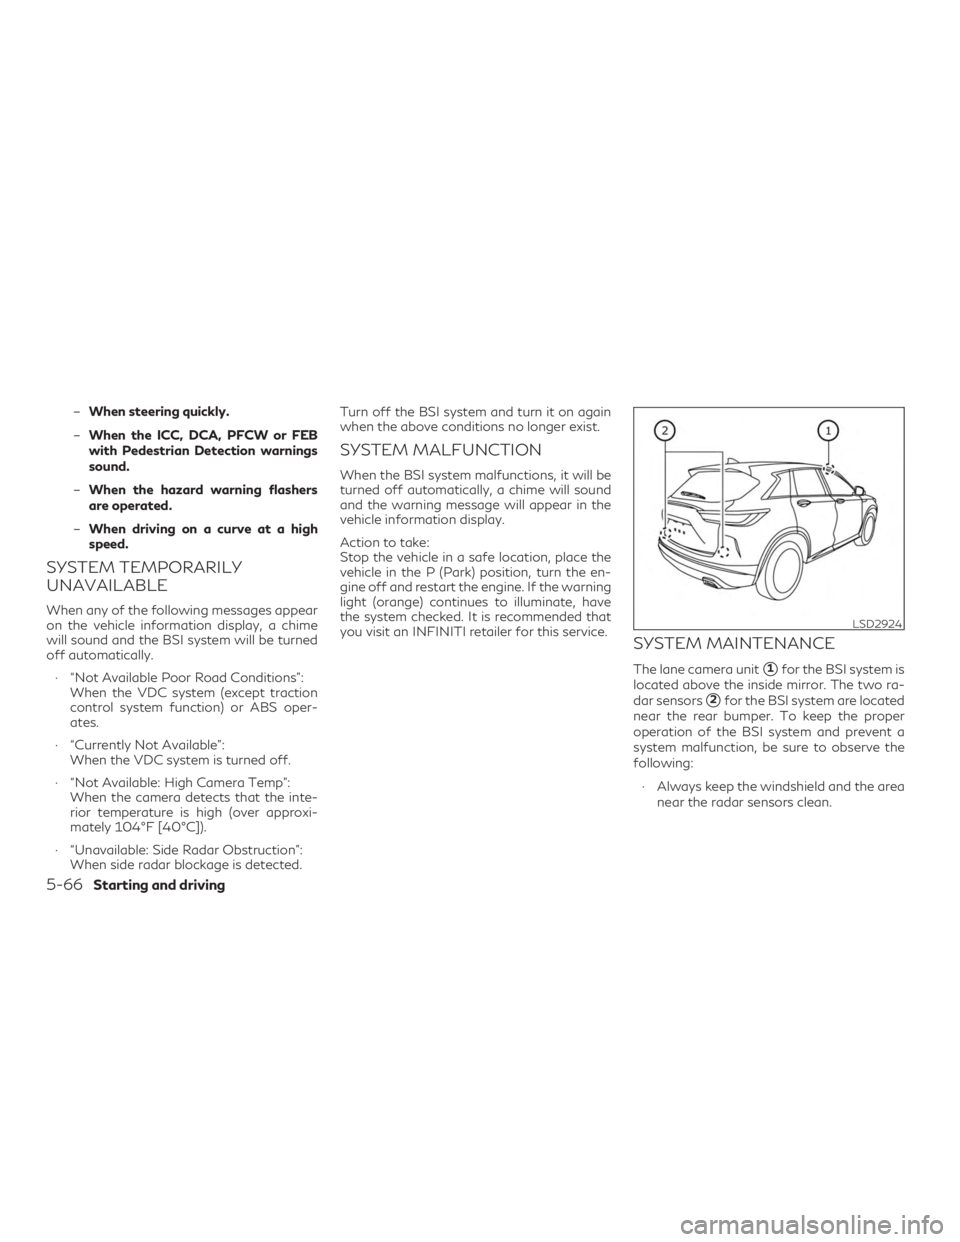 INFINITI QX50 2020  Owners Manual –When steering quickly.
– When the ICC, DCA, PFCW or FEB
with Pedestrian Detection warnings
sound.
– When the hazard warning flashers
are operated.
– When driving on a curve at a high
speed.
S